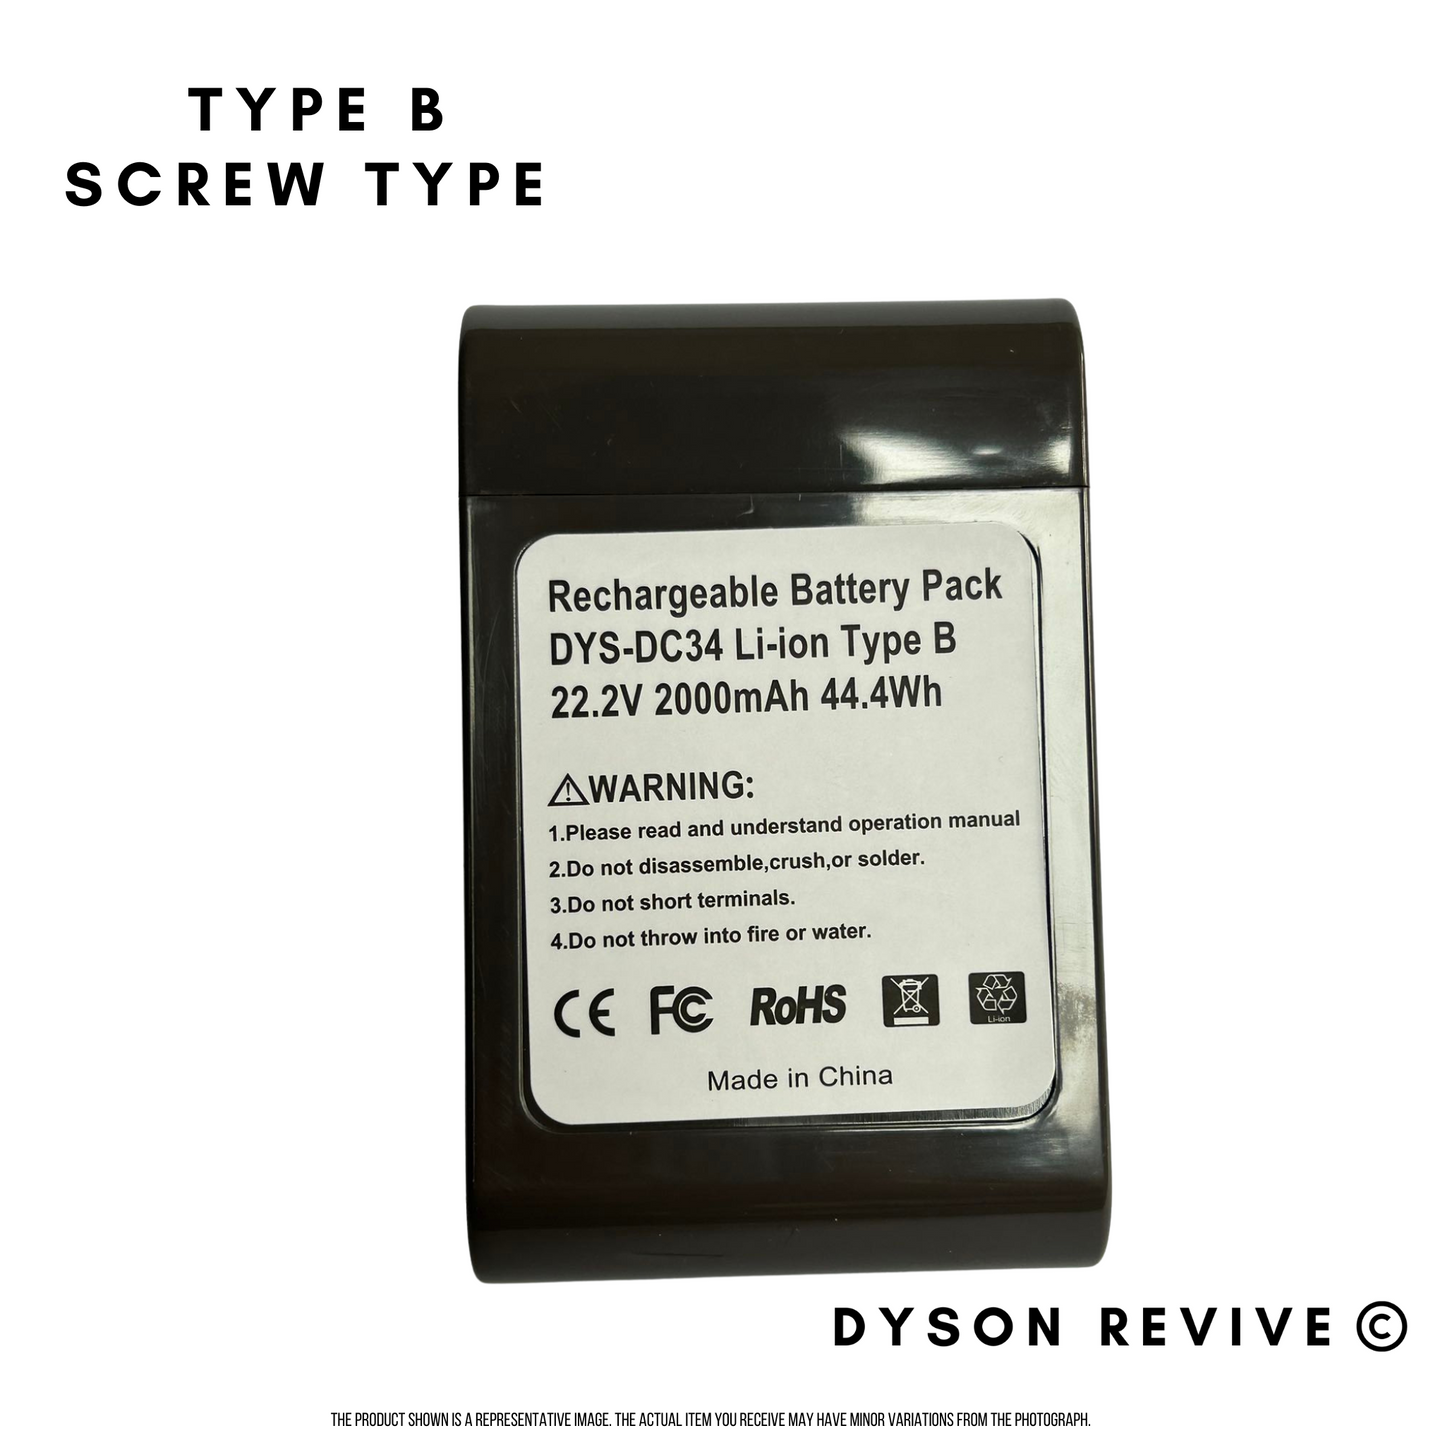 Type B Brand New Replacement Battery For Dyson DC31, DC34, DC35, DC44 & DC45 - Dyson Revive